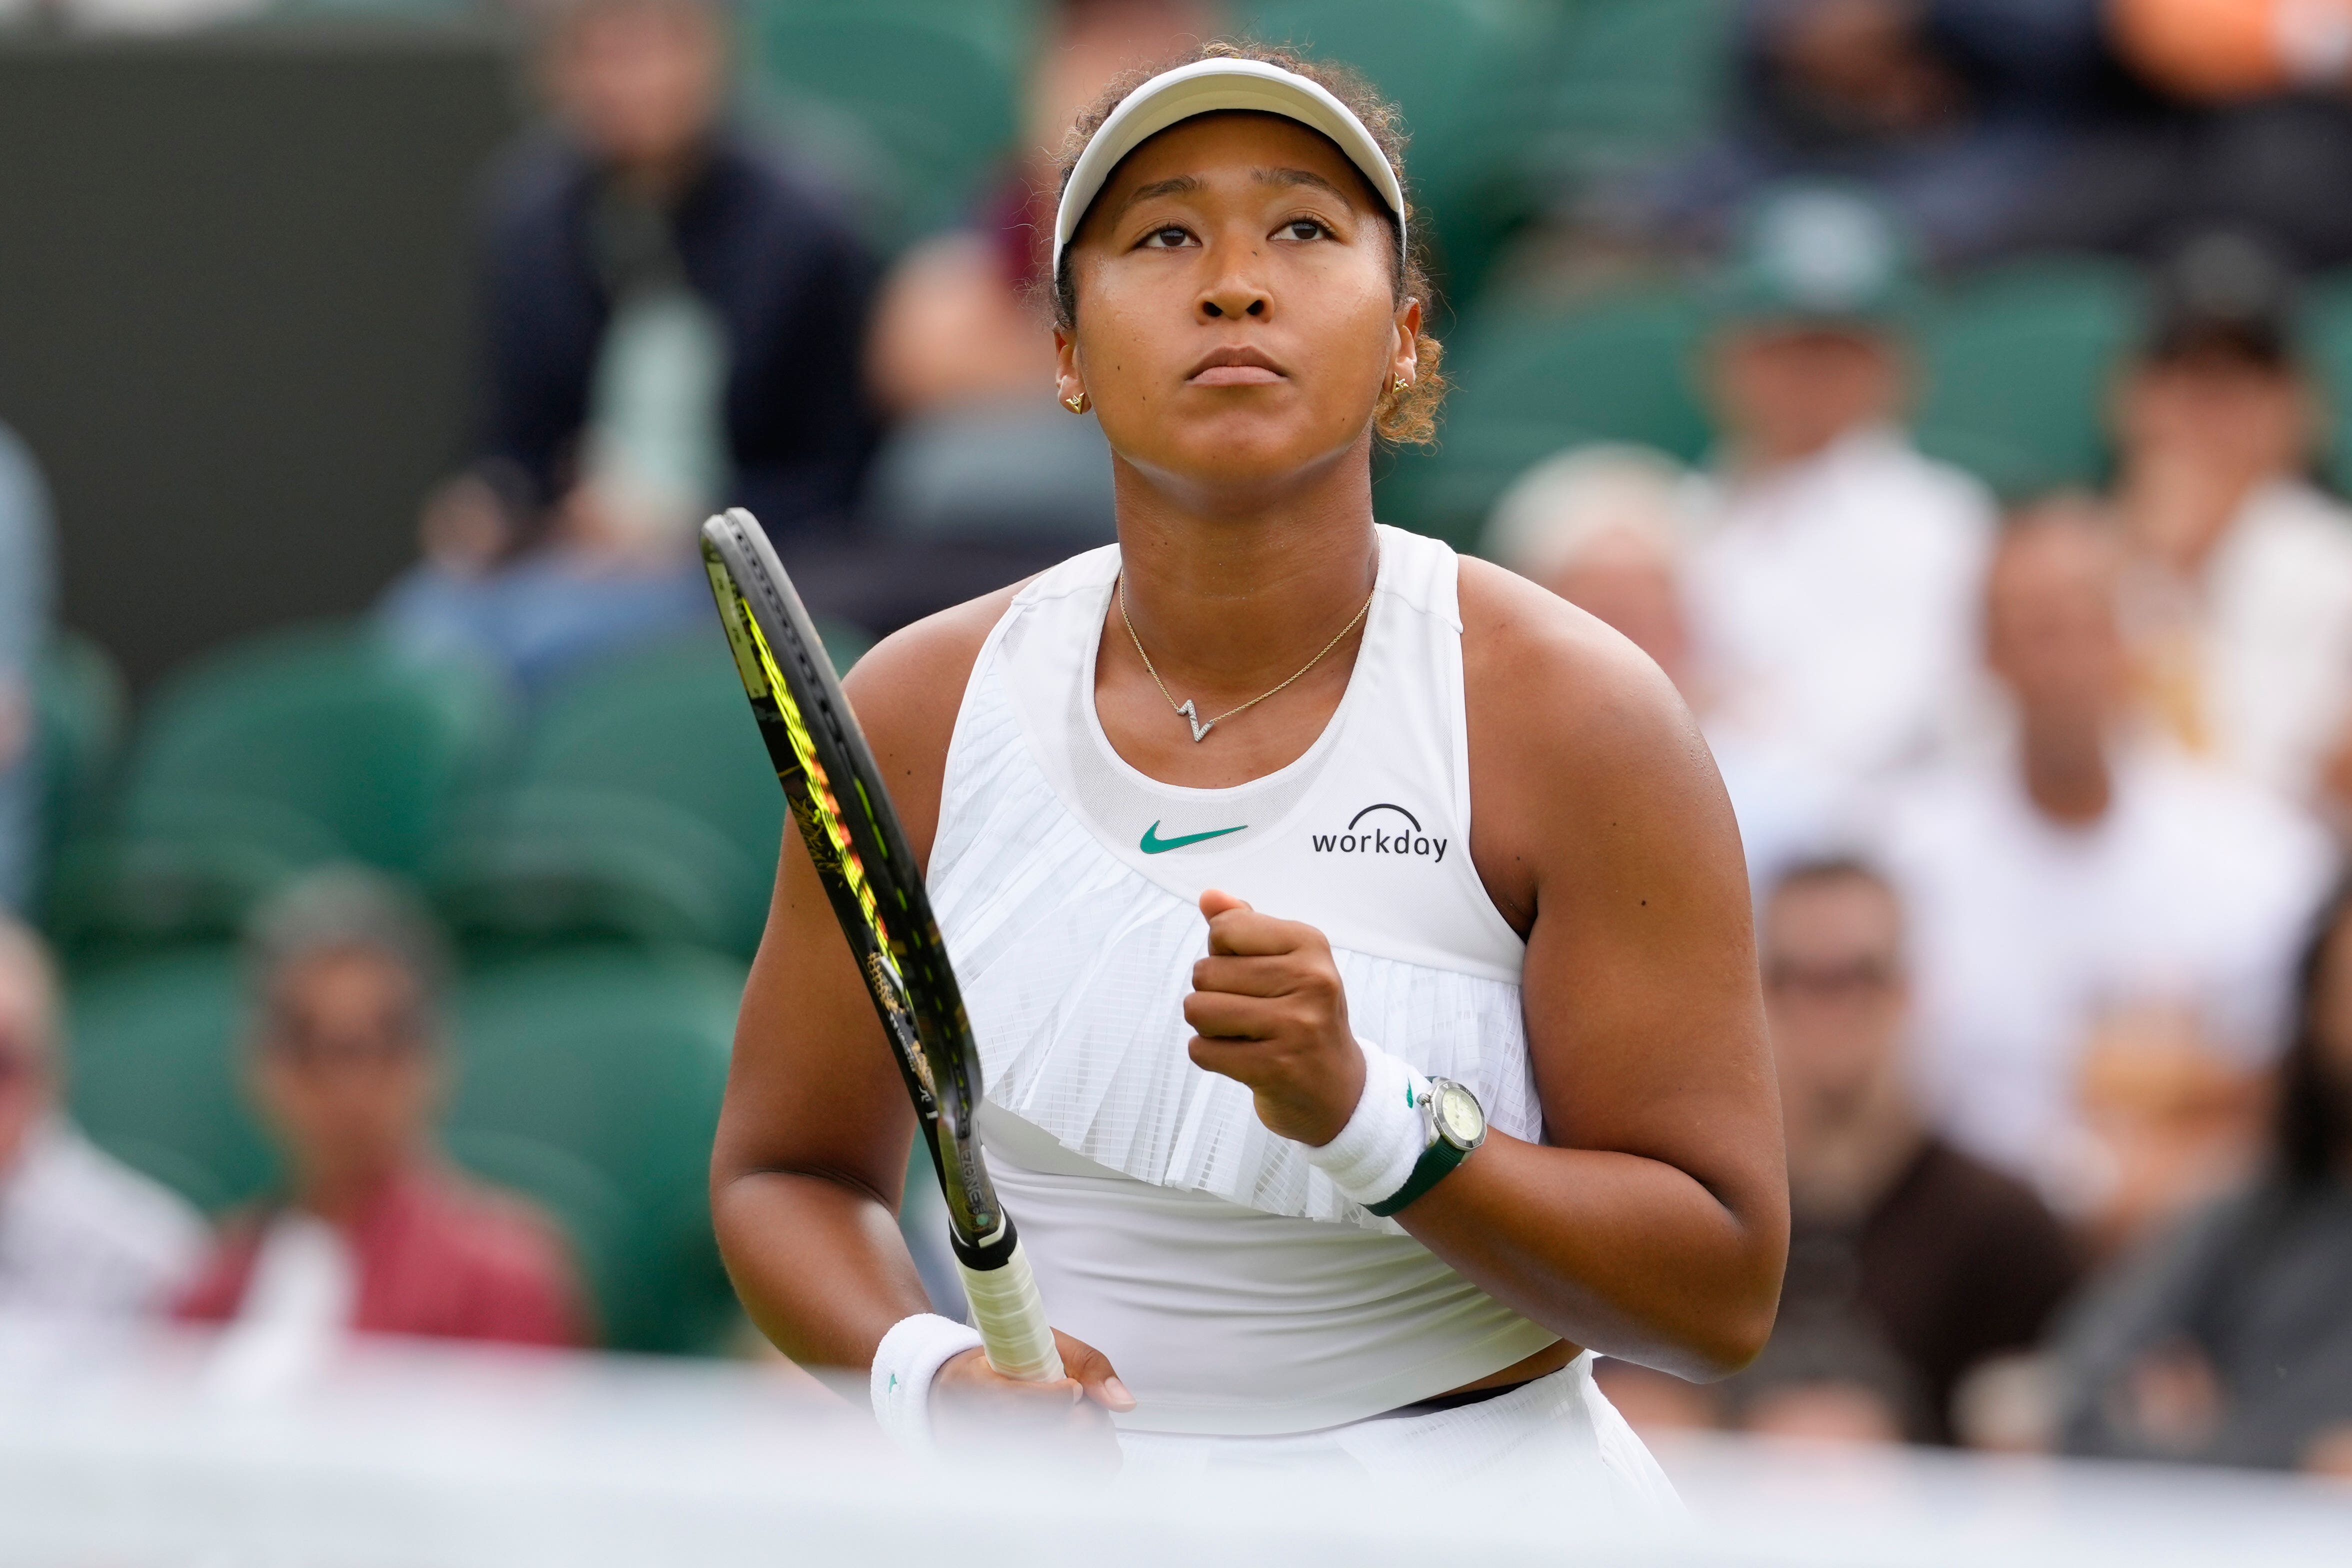 Naomi Osaka progressed into the second round of Wimbledon with victory over Diane Parry (AP Photo/Kirsty Wigglesworth)